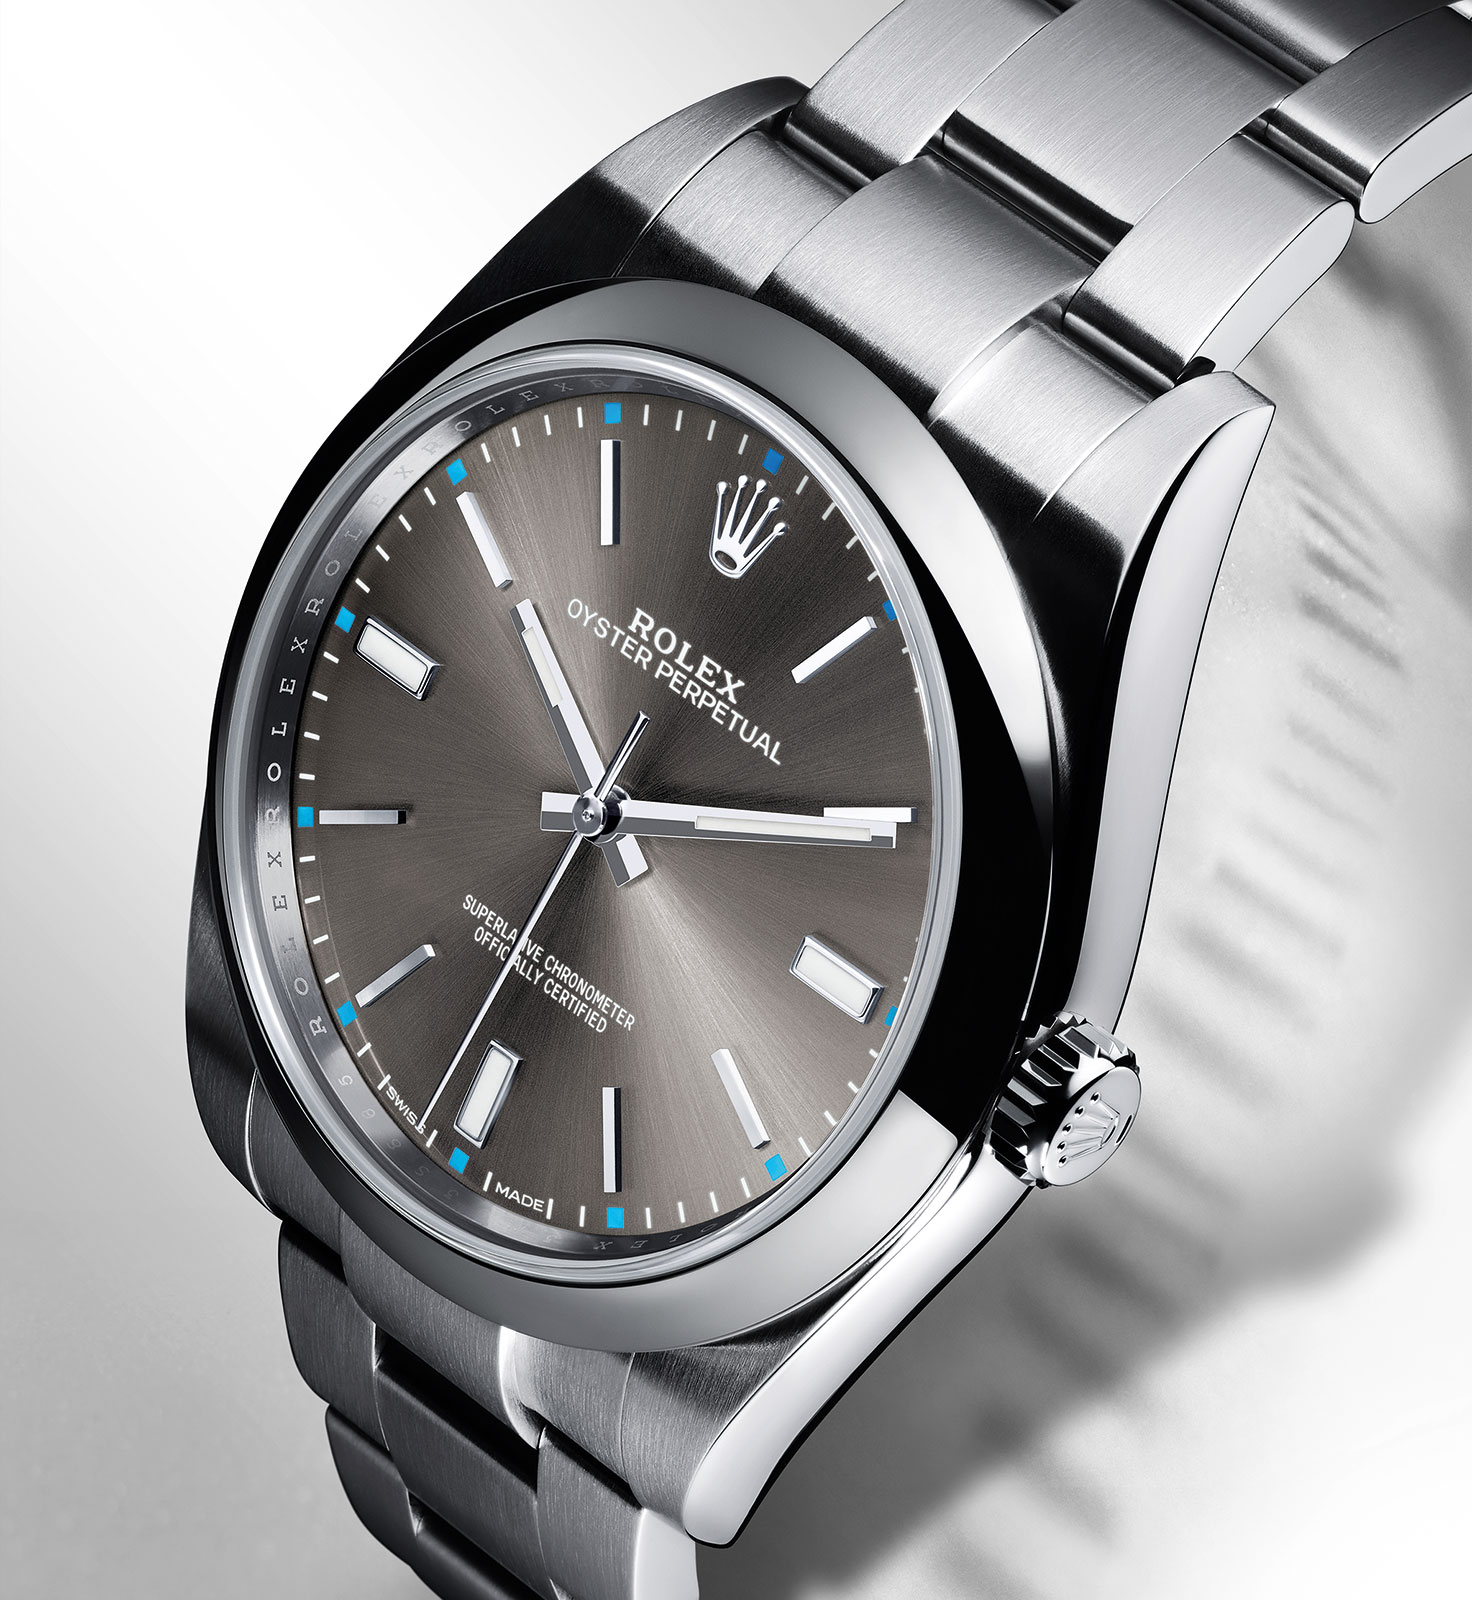 Oyster Perpetual 39 - The Larger, Facelifted Entry Level Rolex Oyster ...